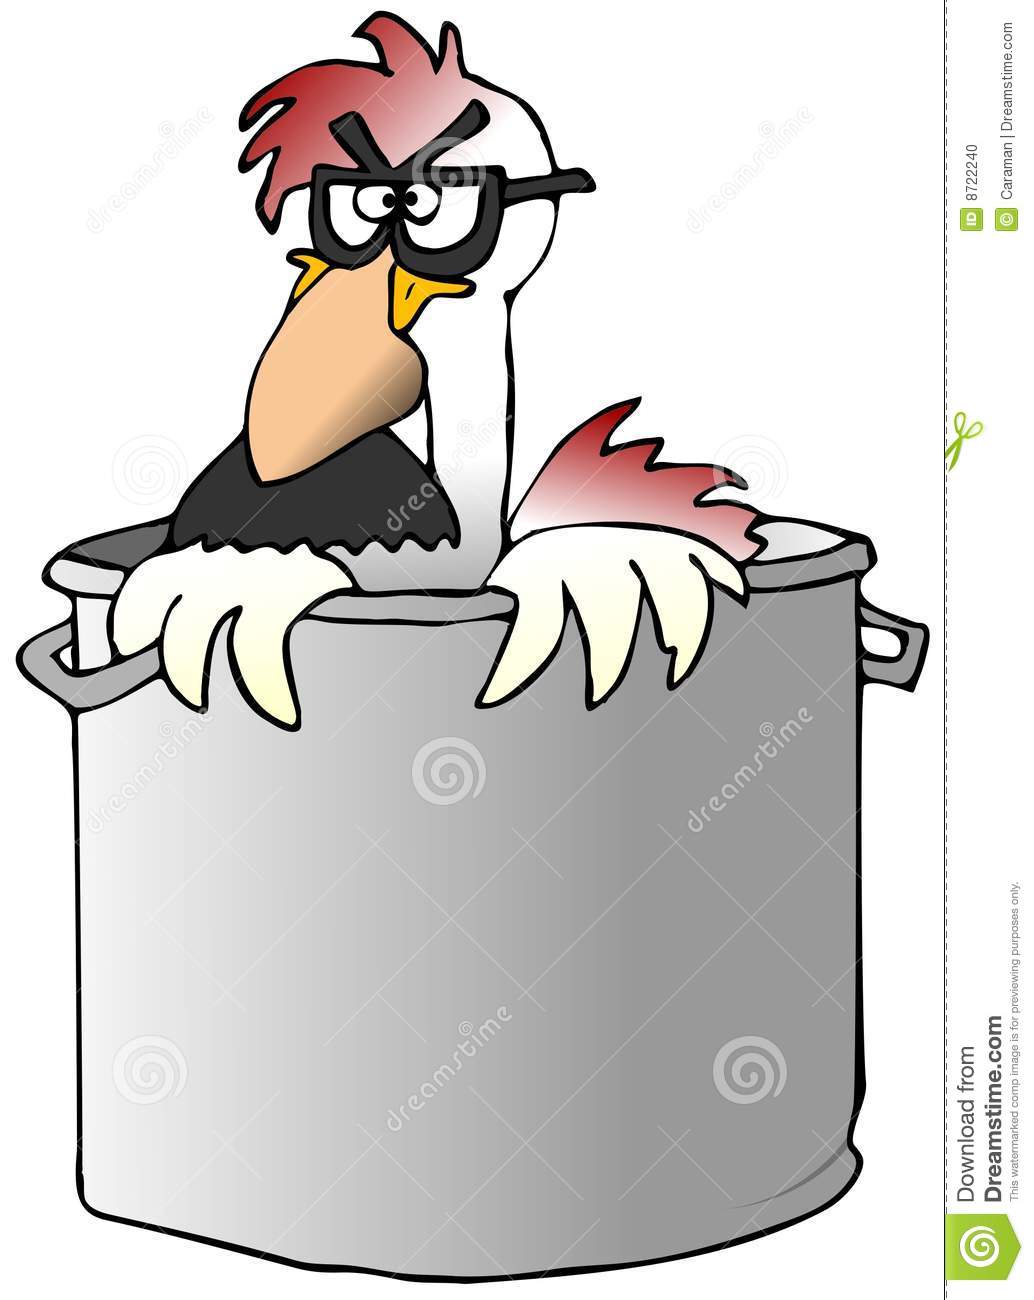 Chicken Soup Can Clipart Funny Chicken In A Soup Pot